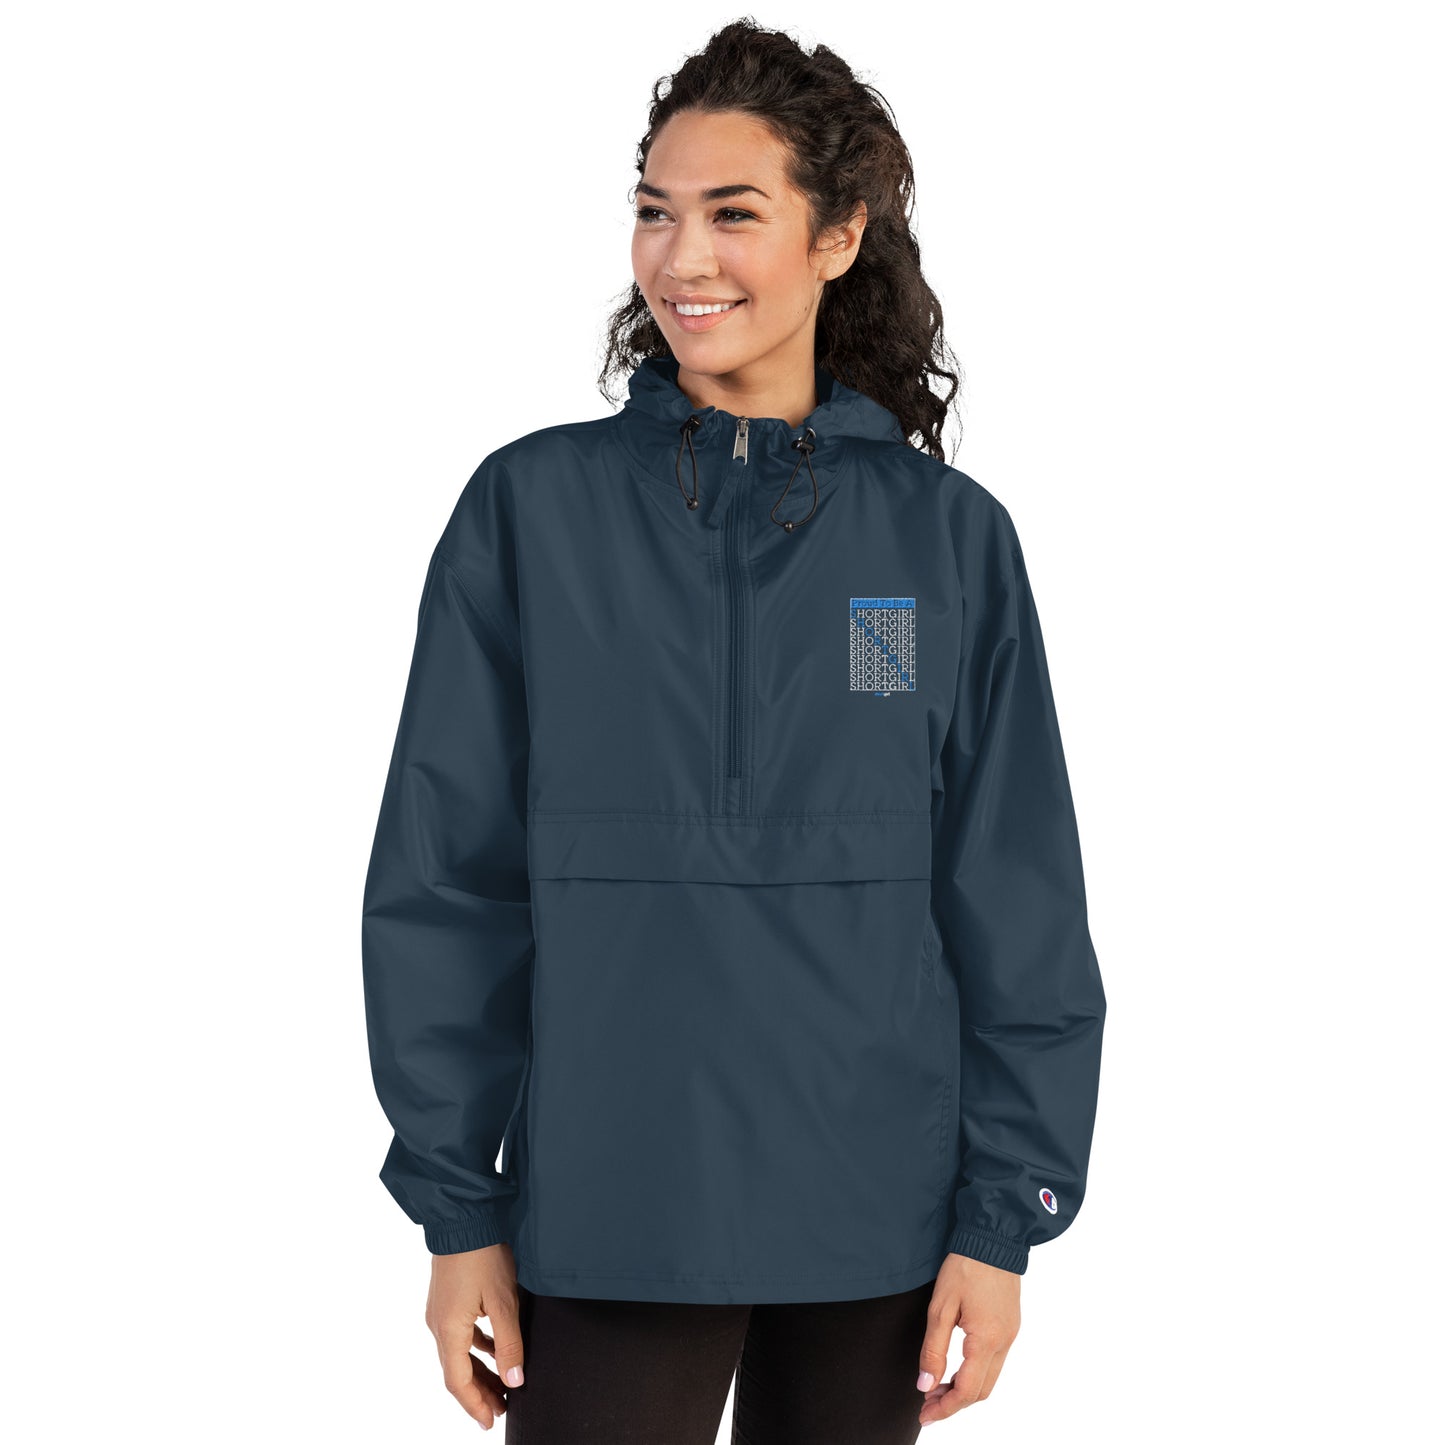 Embroidered Champion Packable Jacket - Proud to be a shortgirl